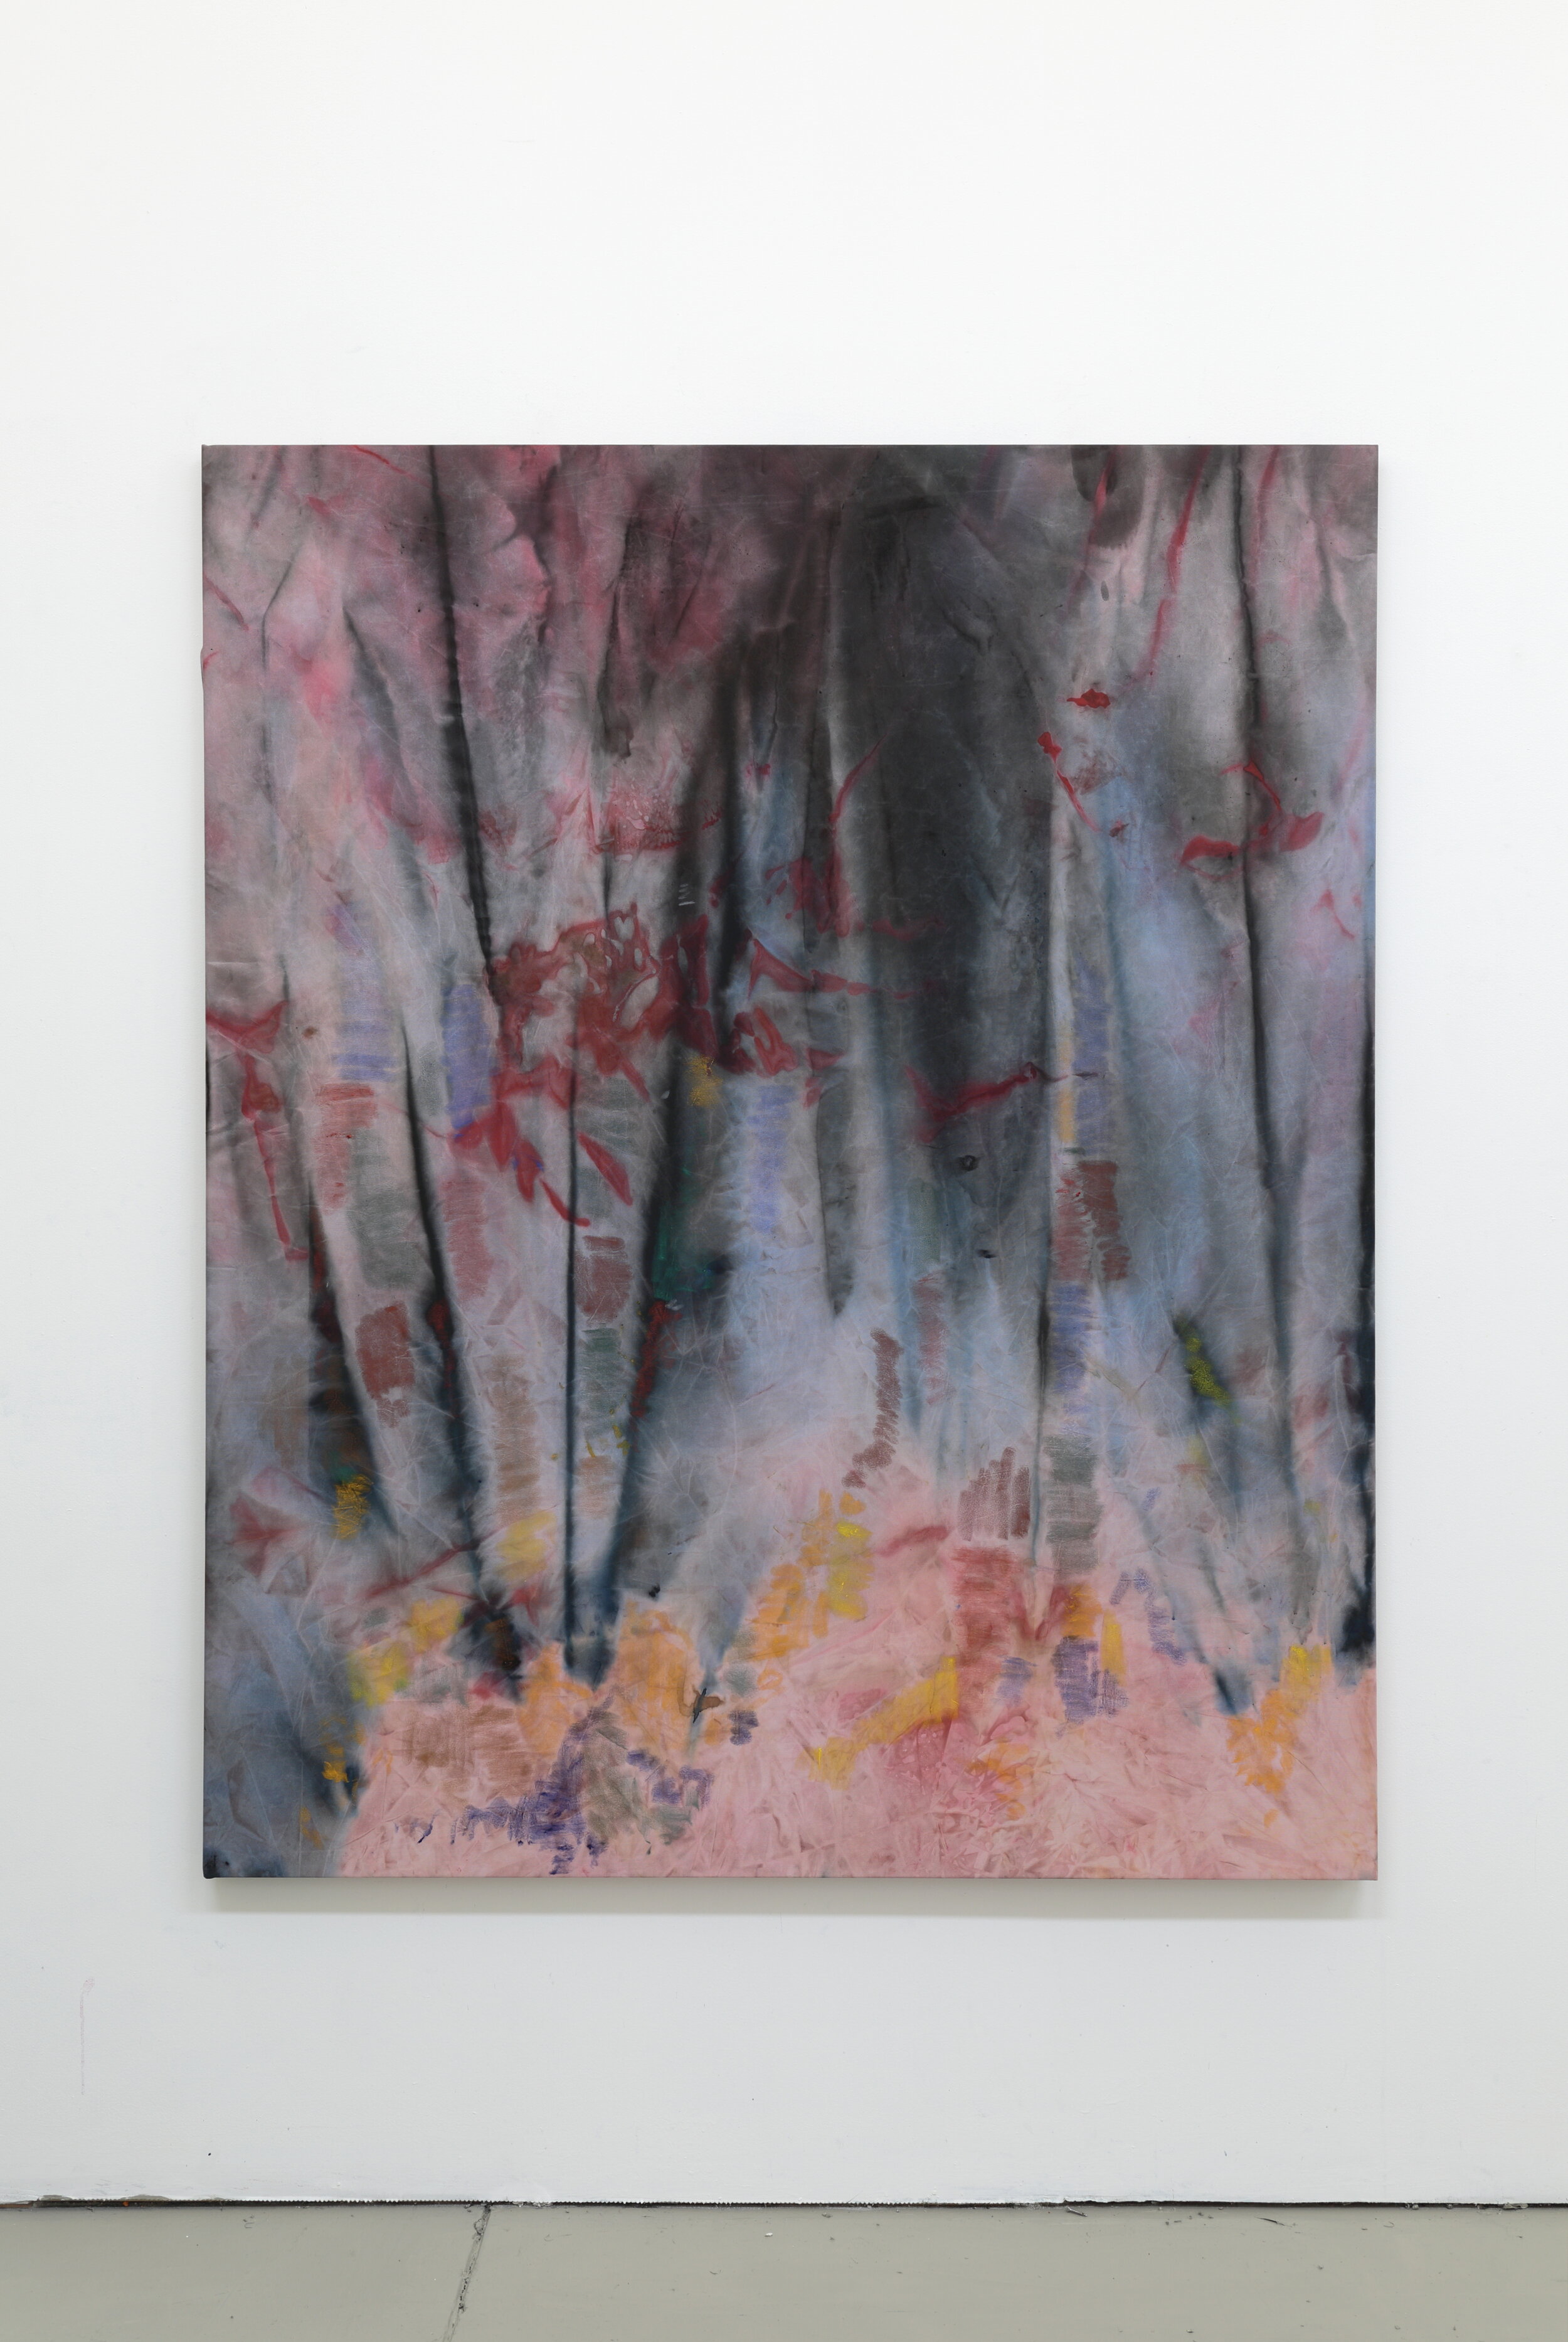   Unscratched , 2019  Acrylic and oil stick on knitted polyester voile  163 x 132 cm 